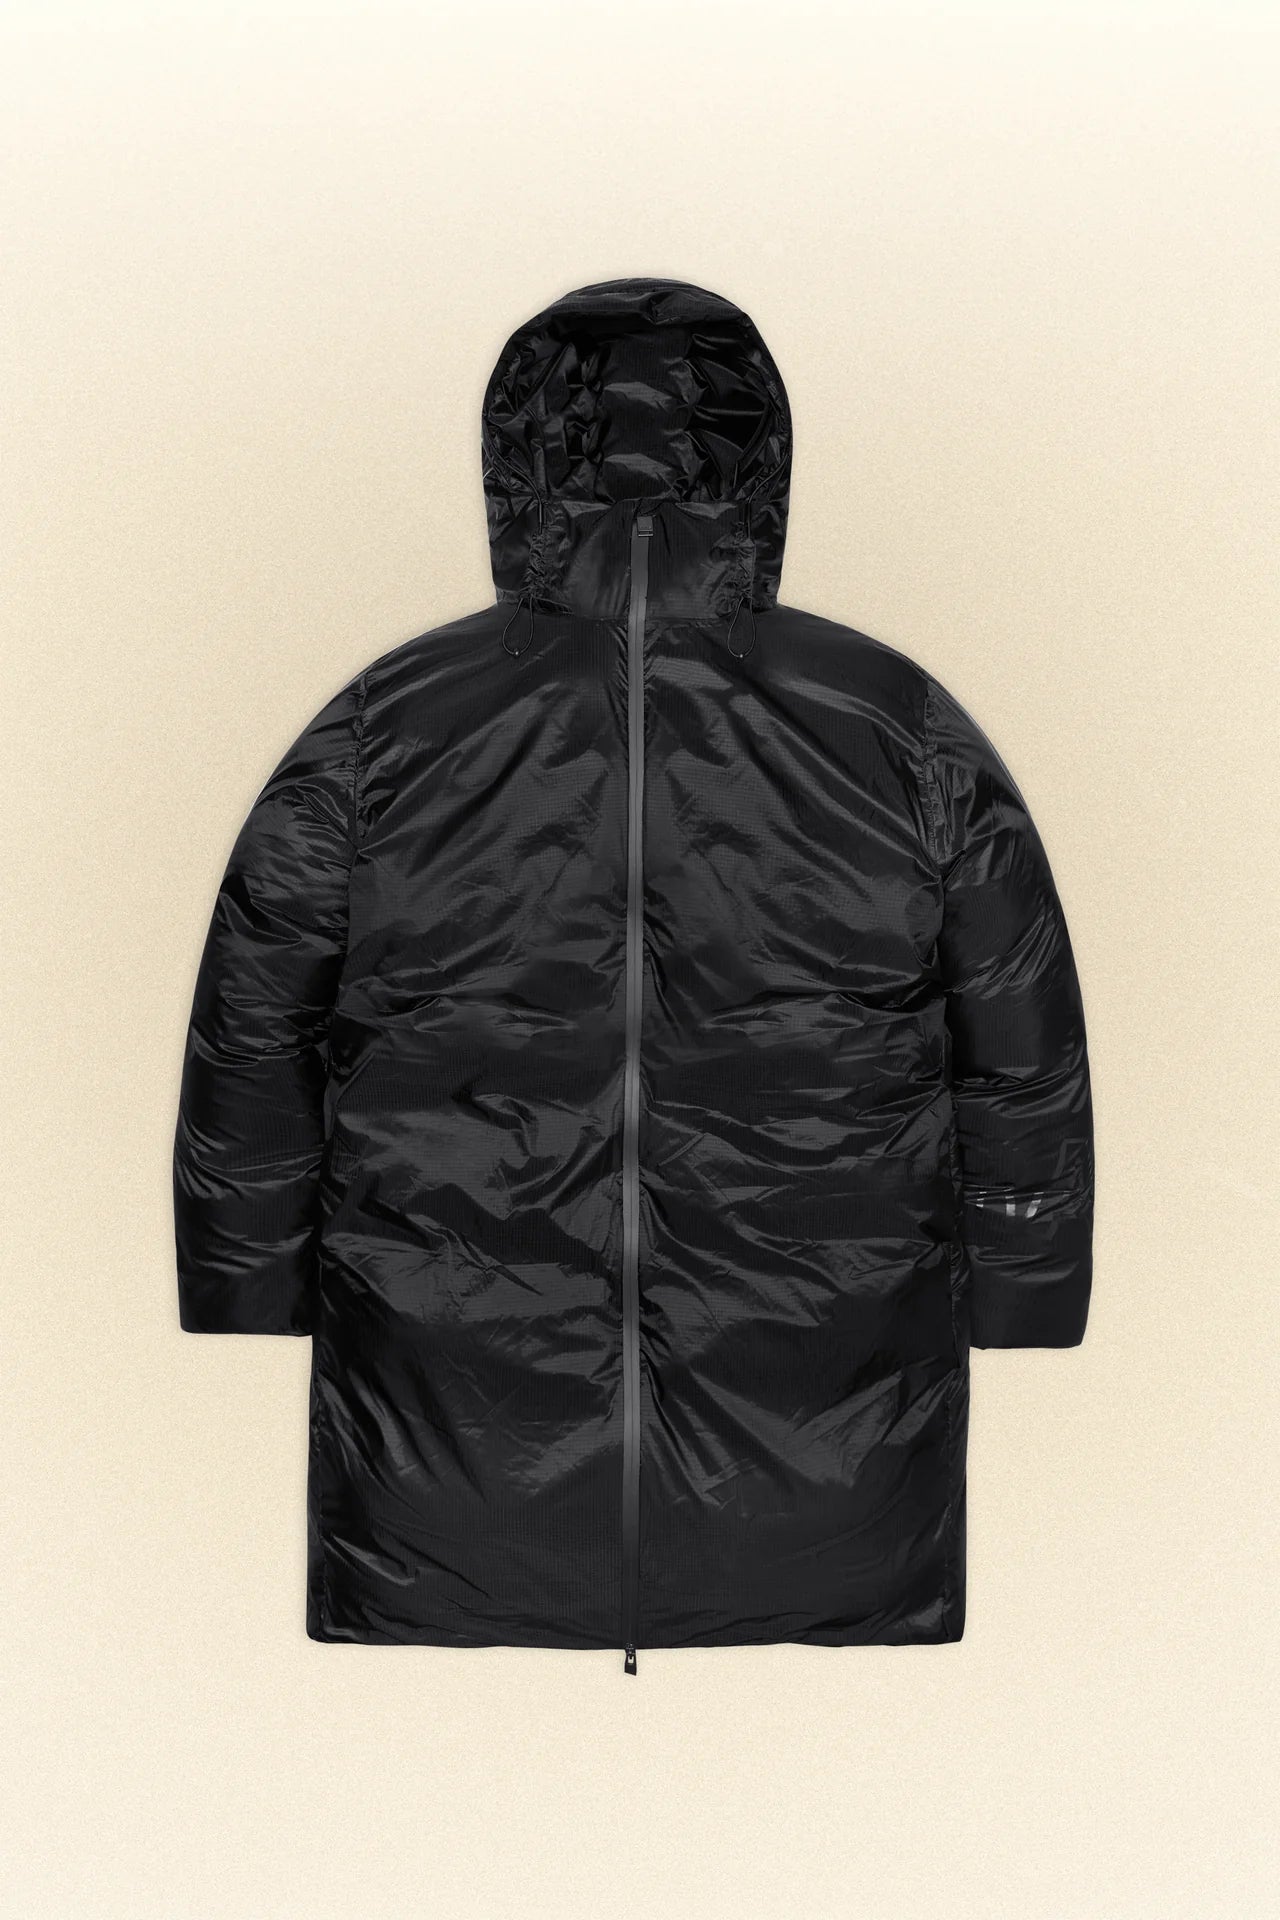 A Kevo Long Puffer - Black by Rains on a white background.